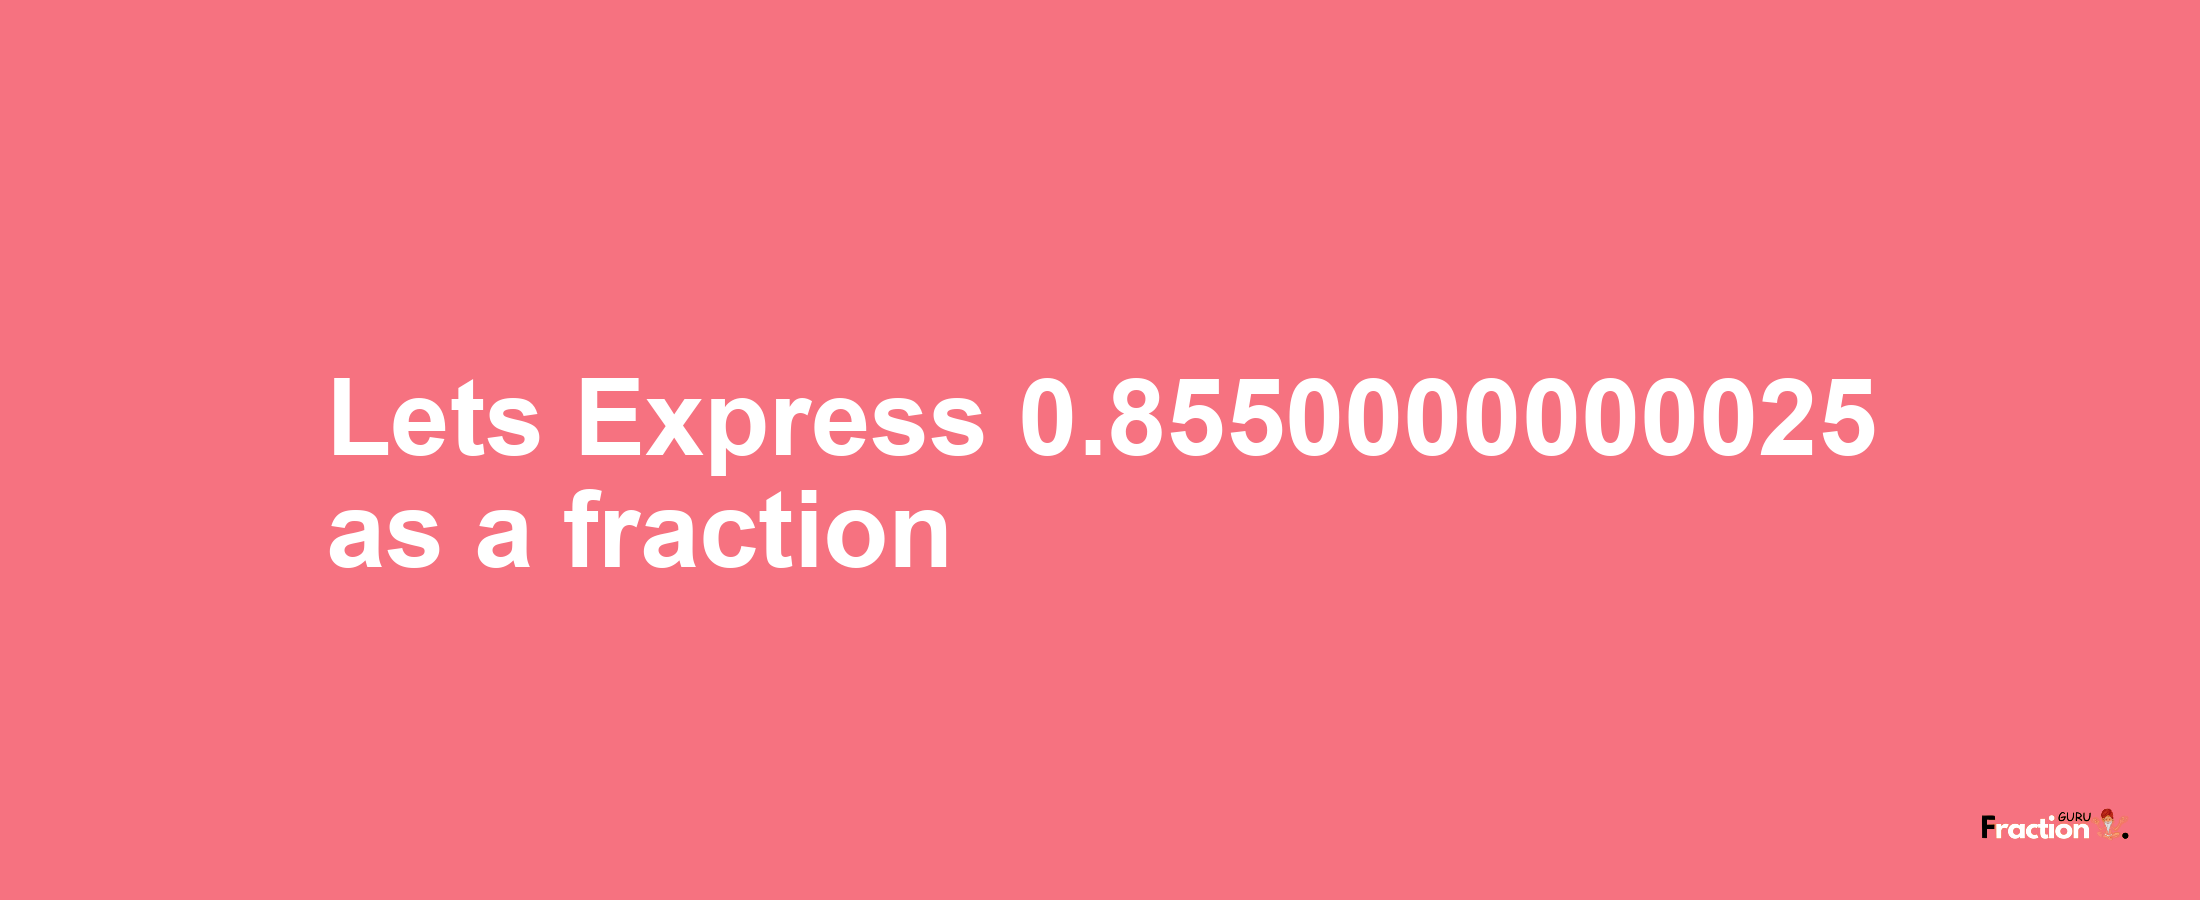 Lets Express 0.8550000000025 as afraction